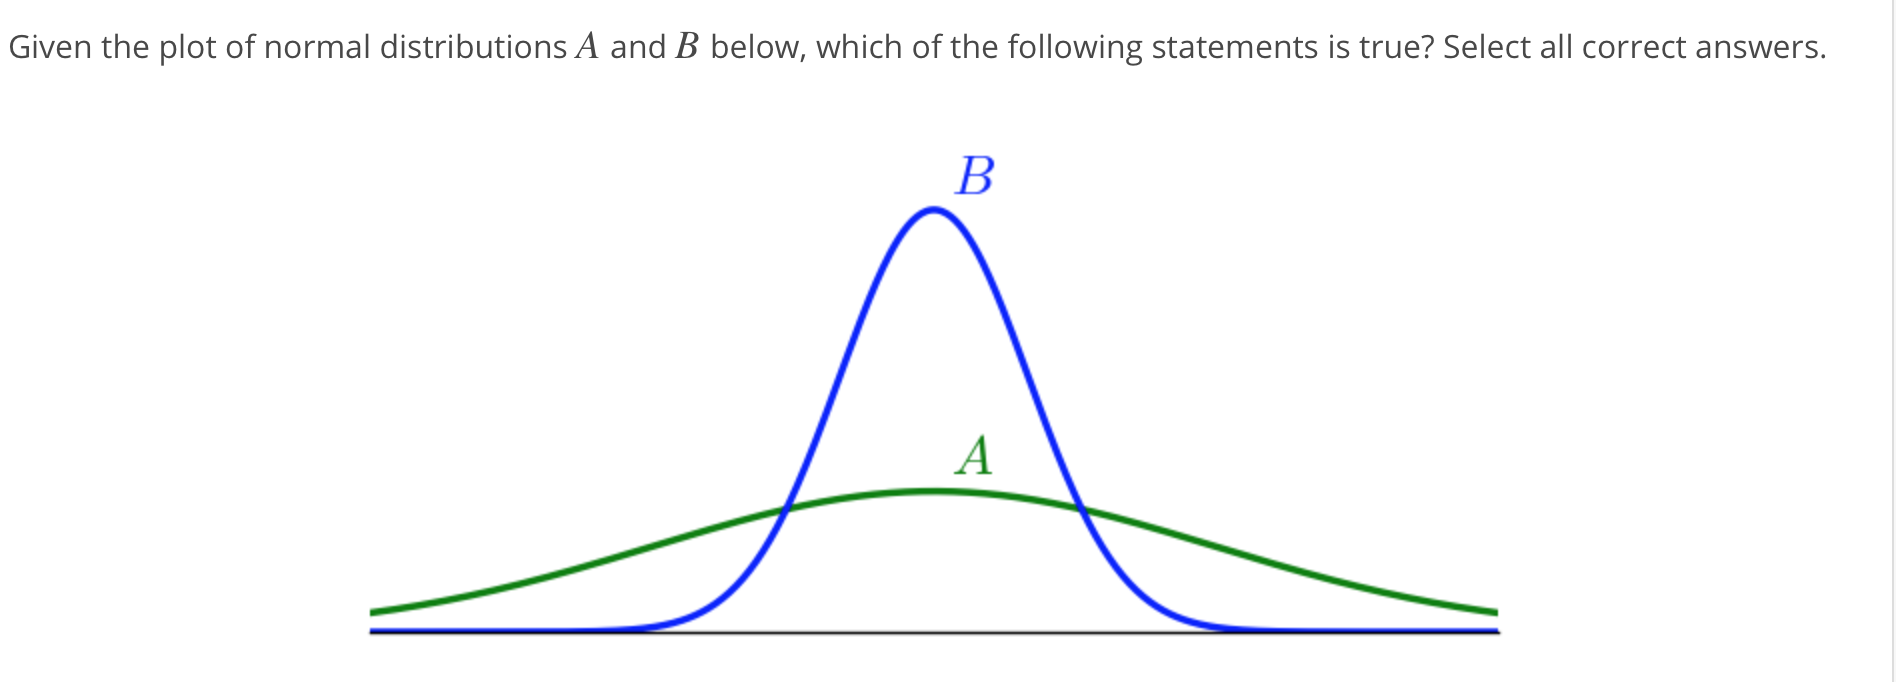 Given the plot of normal distributions A and B below, which of the following statements is true? Select all correct answers
